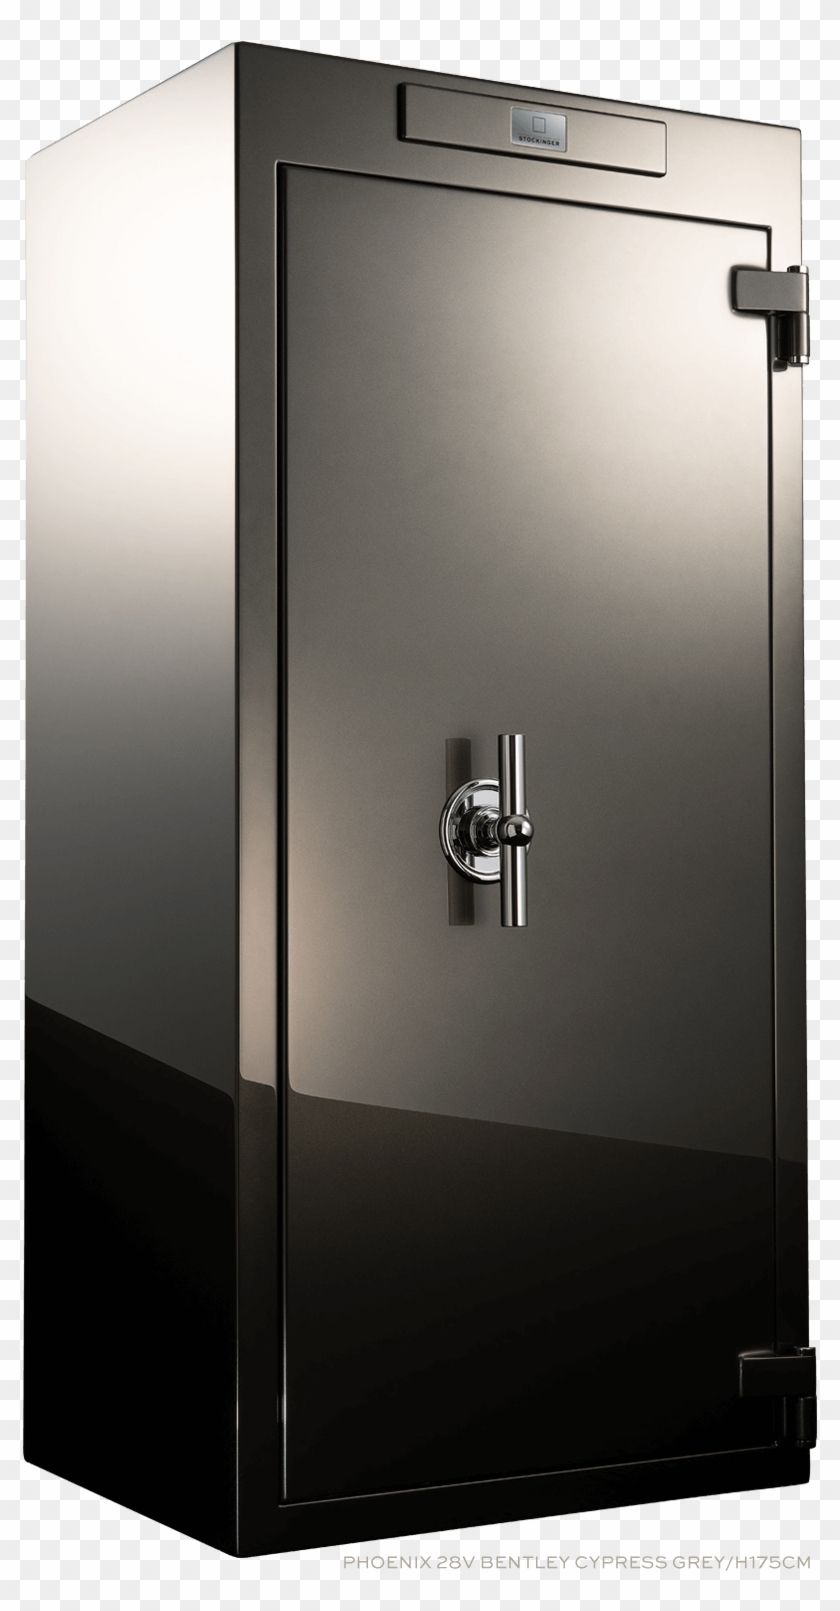 This Impressive Safe Can Hold Up To 70 Precision Watch - Luxury Safe For Home Clipart #2473883